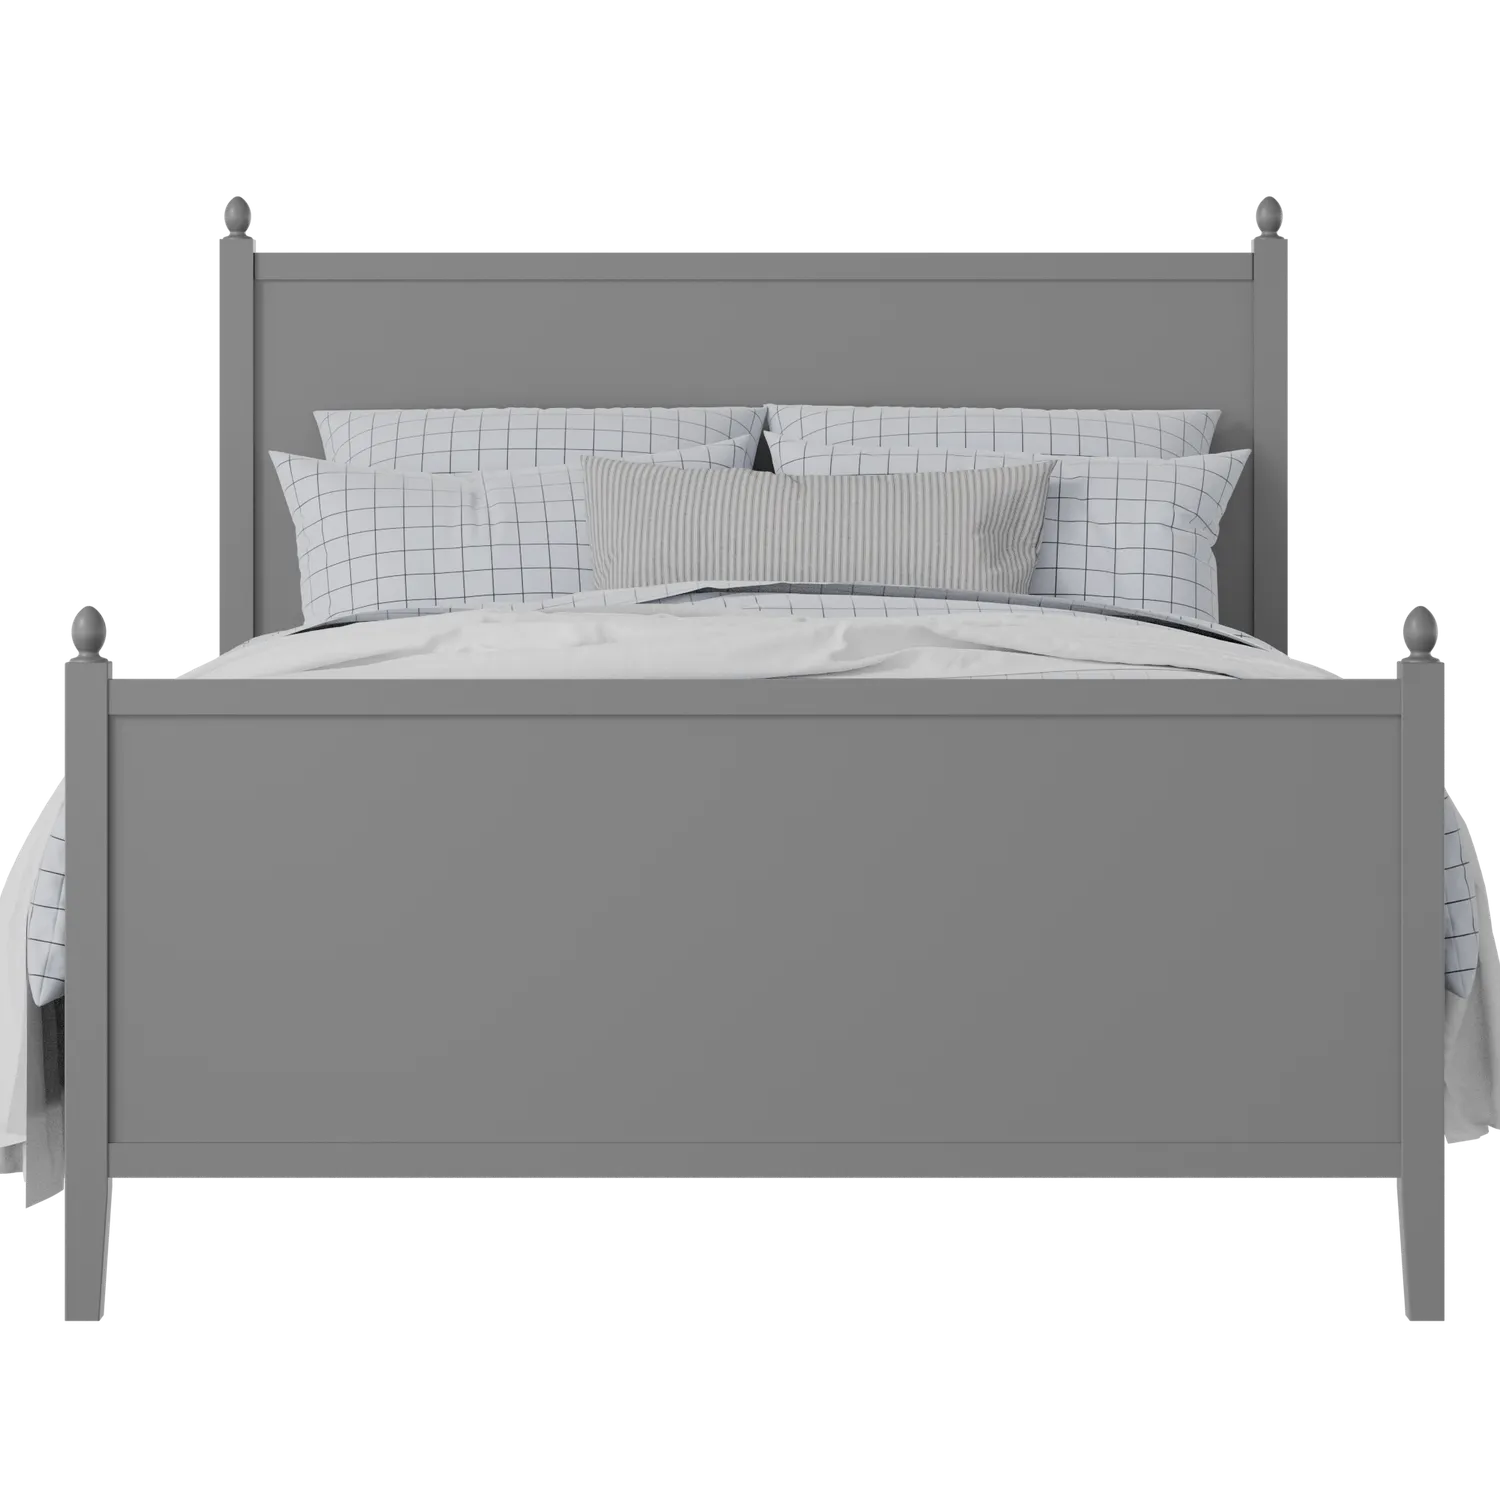 Marbella Painted painted wood bed in grey with Juno mattress